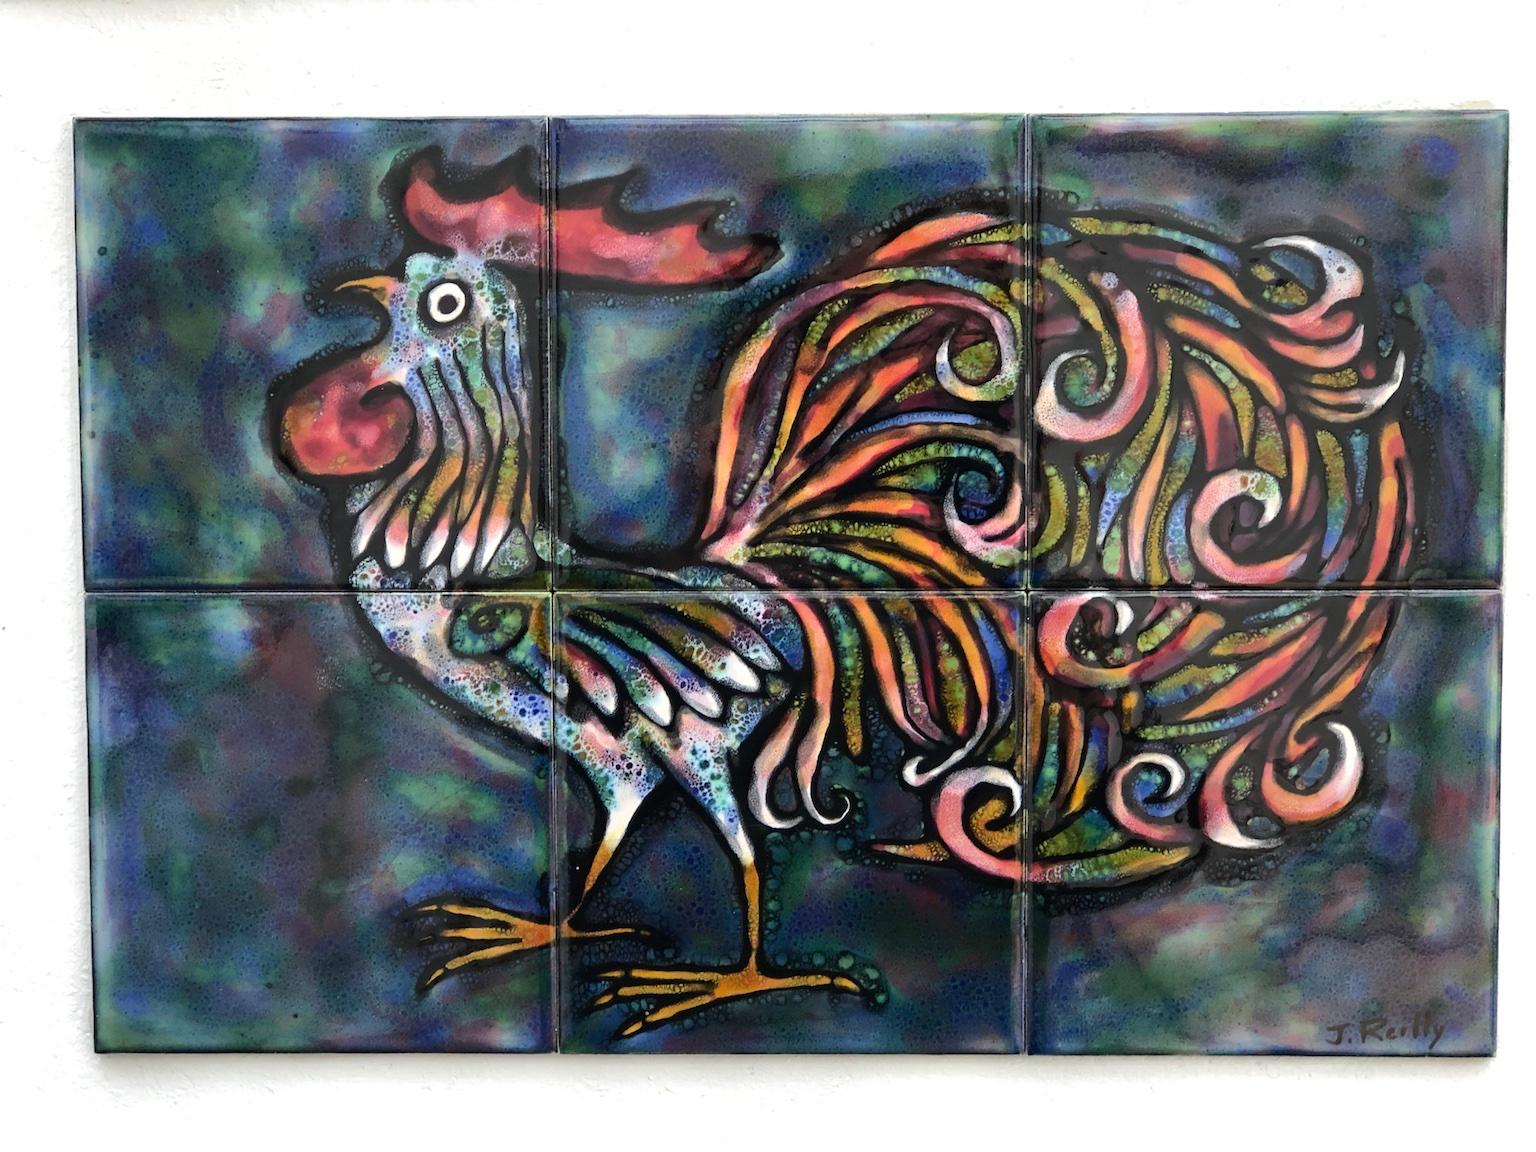 Mid-Century Modern Ceramic Tile Artwork of a Cockeral, by John Reilly, Isle of Wight Pottery, 1970s